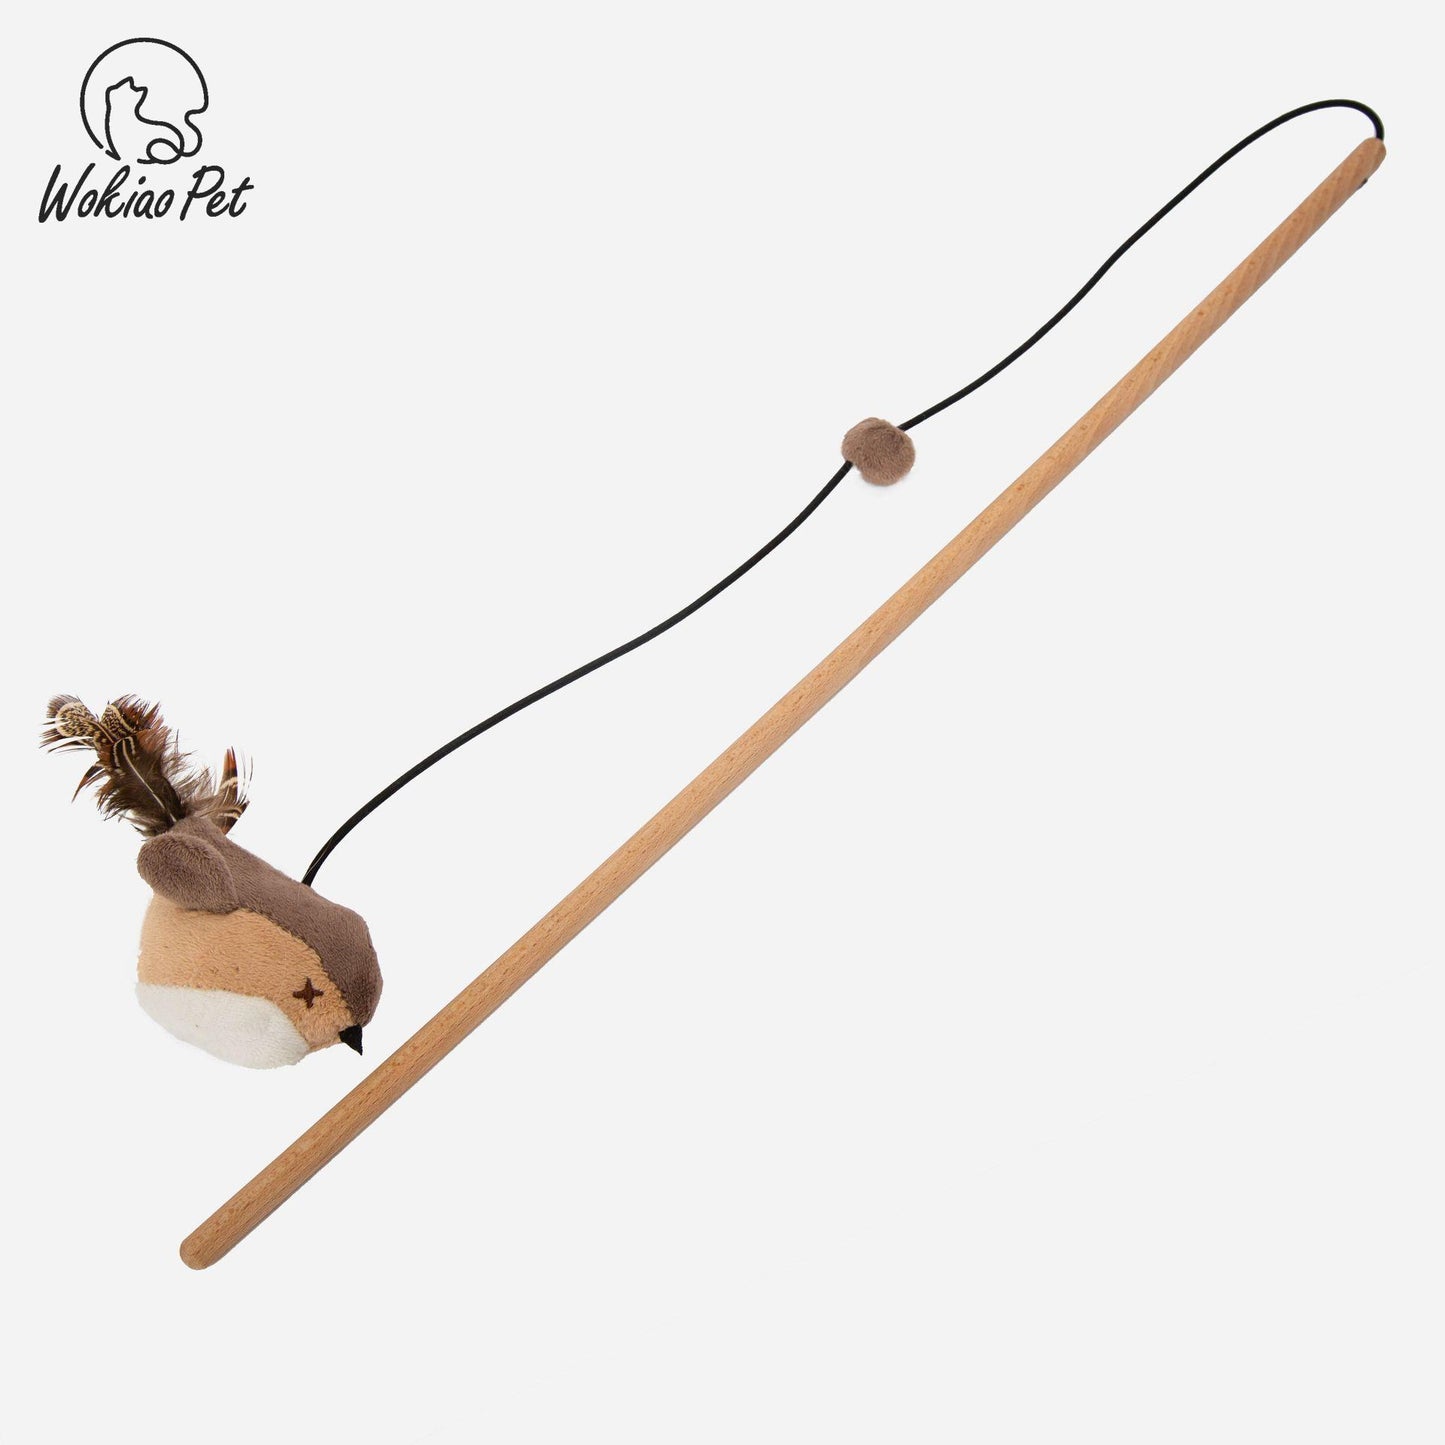 Sparrow interactive cat wand, with feathers, bell, elastic wooden stick, fishing and hunting, and sound bird